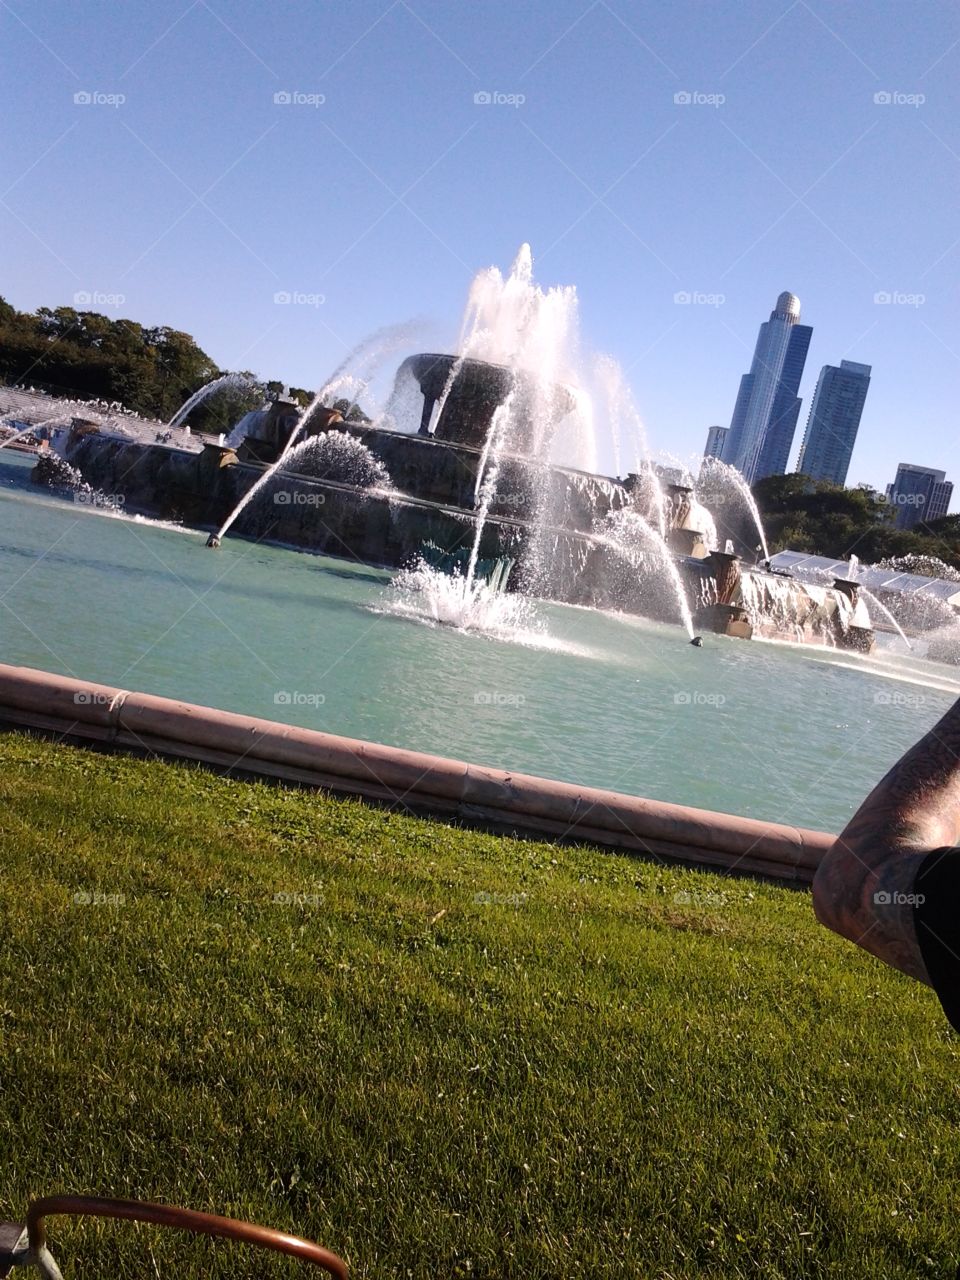 married with children. fountain in grant park